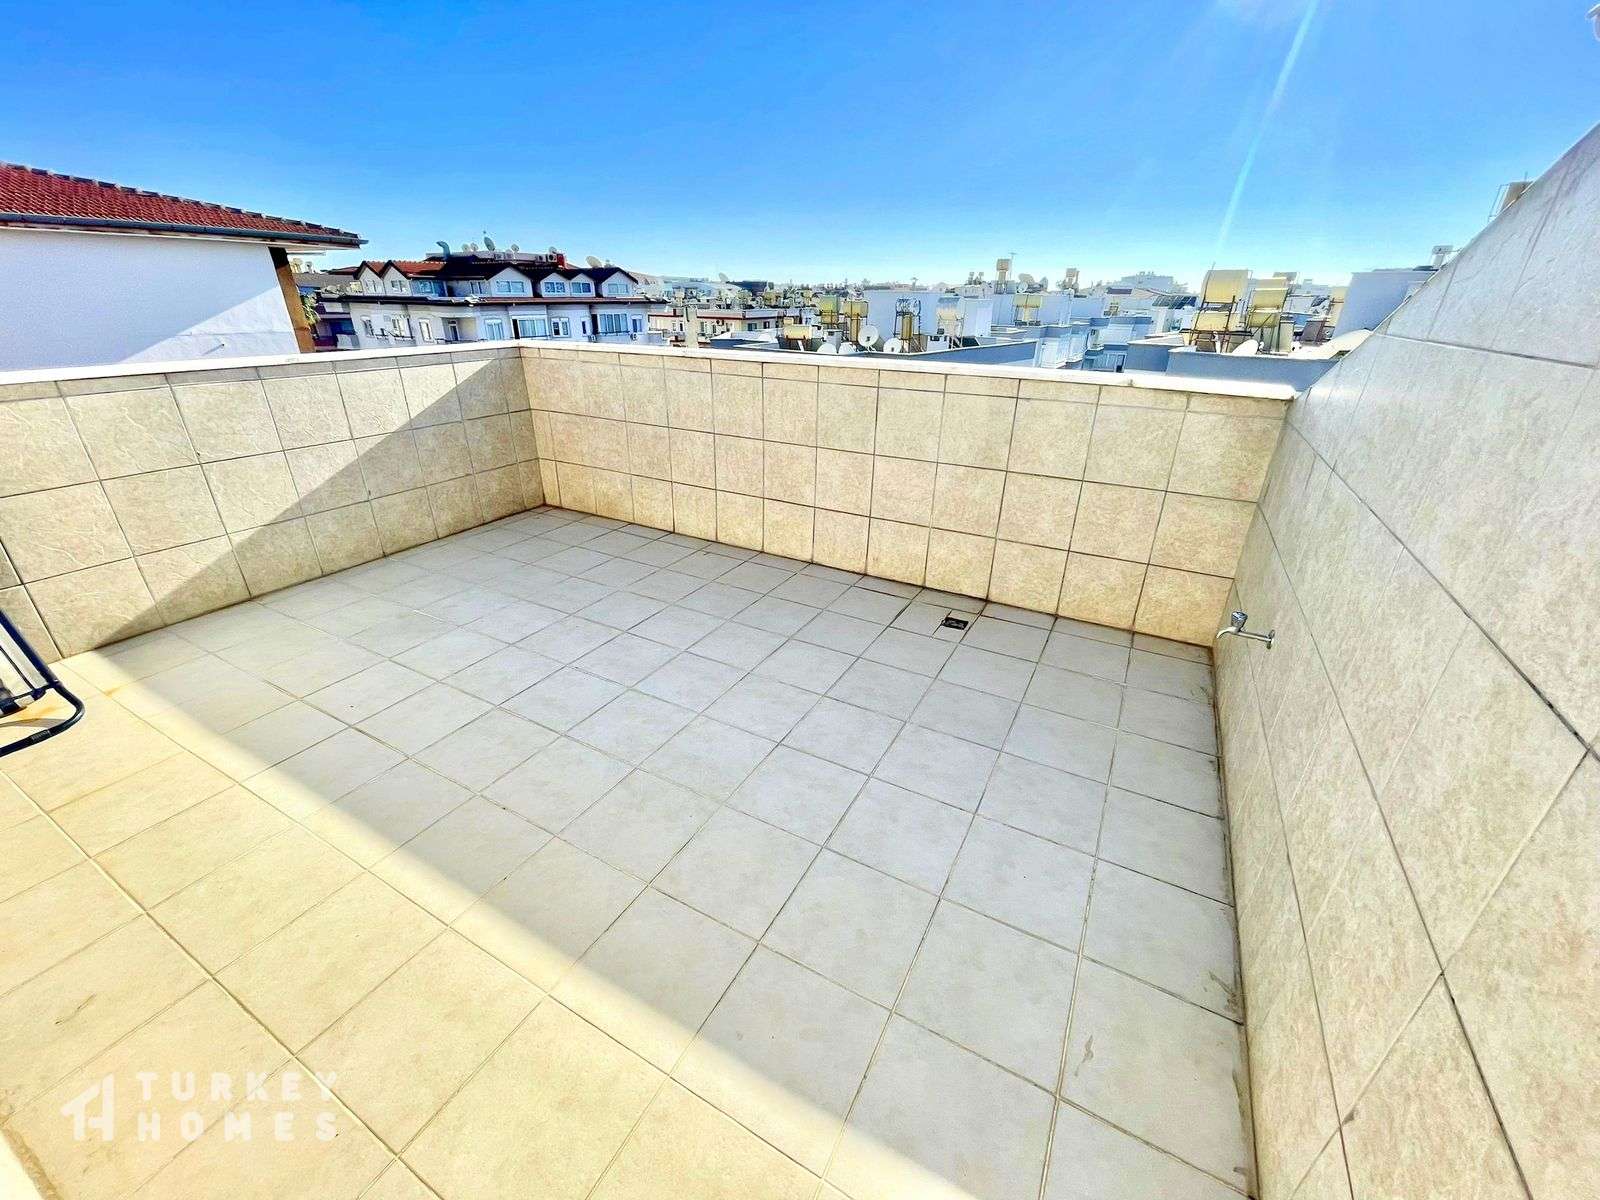 3-Bed Oba Penthouse- Roof Terrace